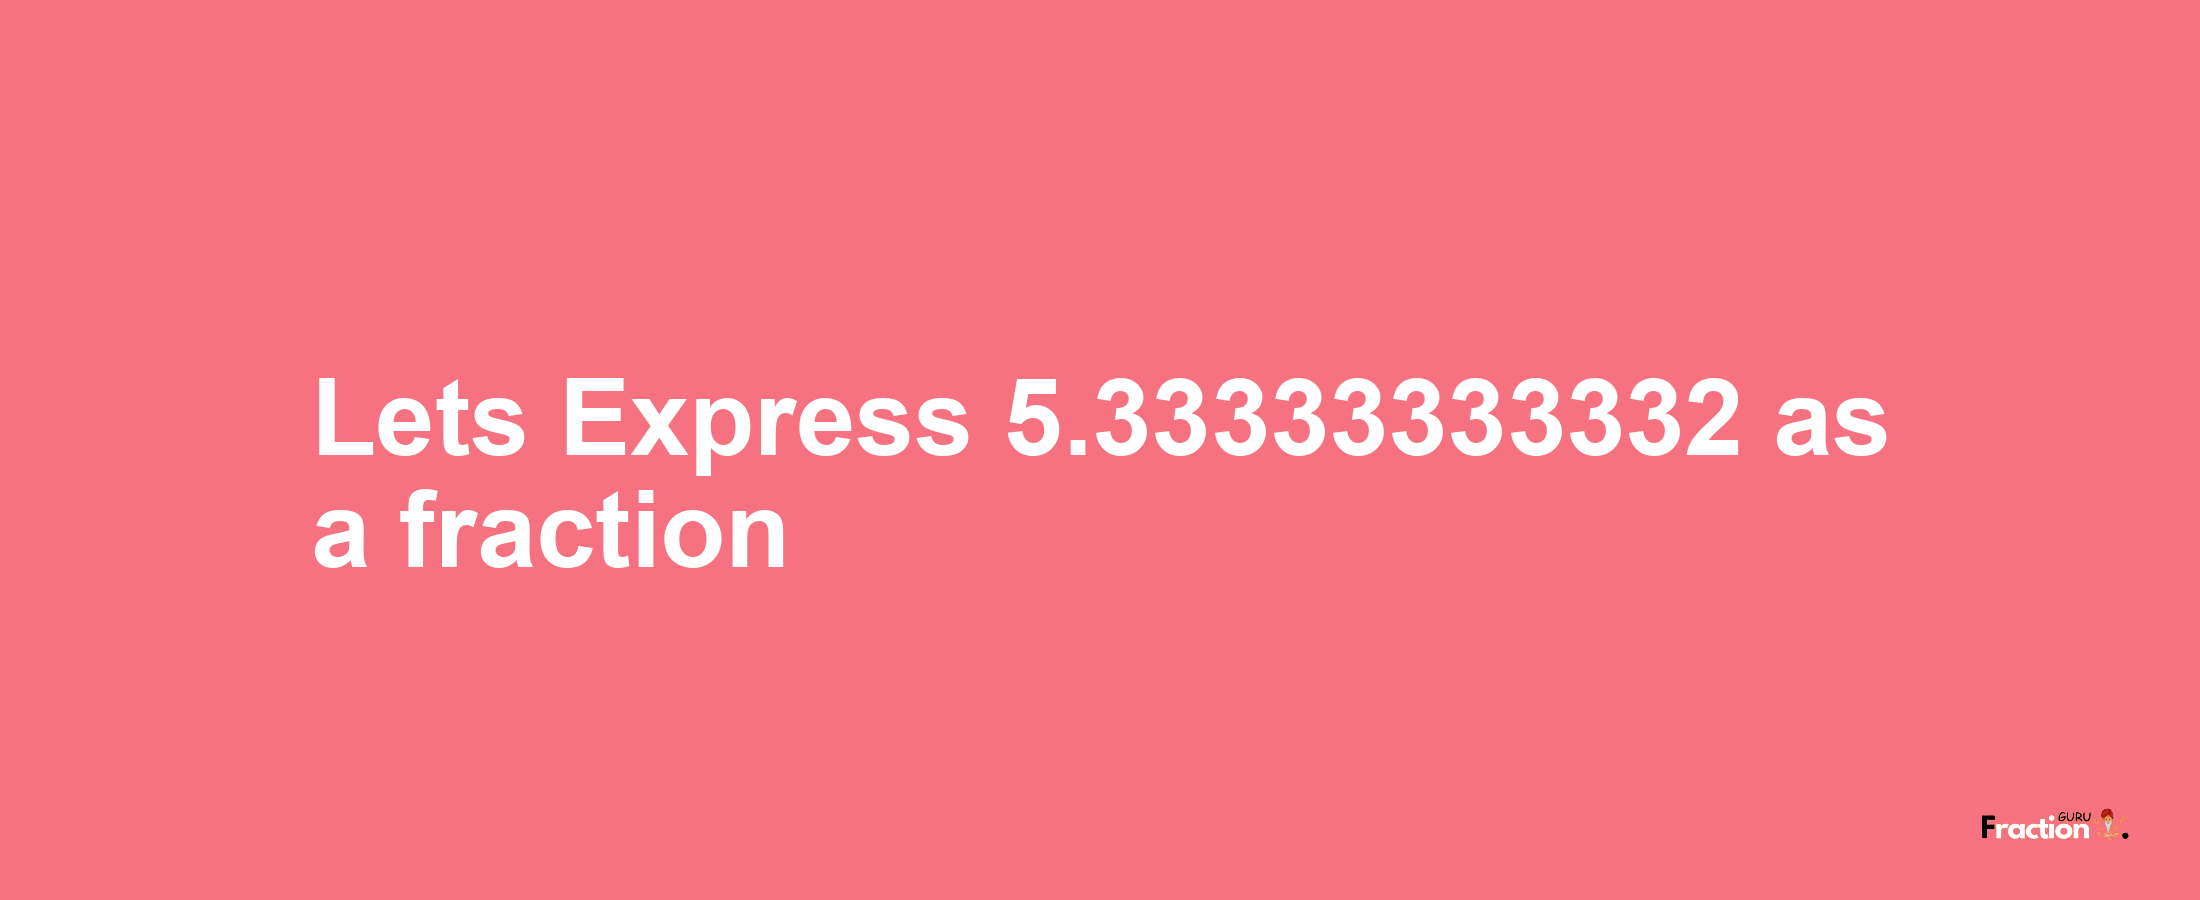 Lets Express 5.33333333332 as afraction